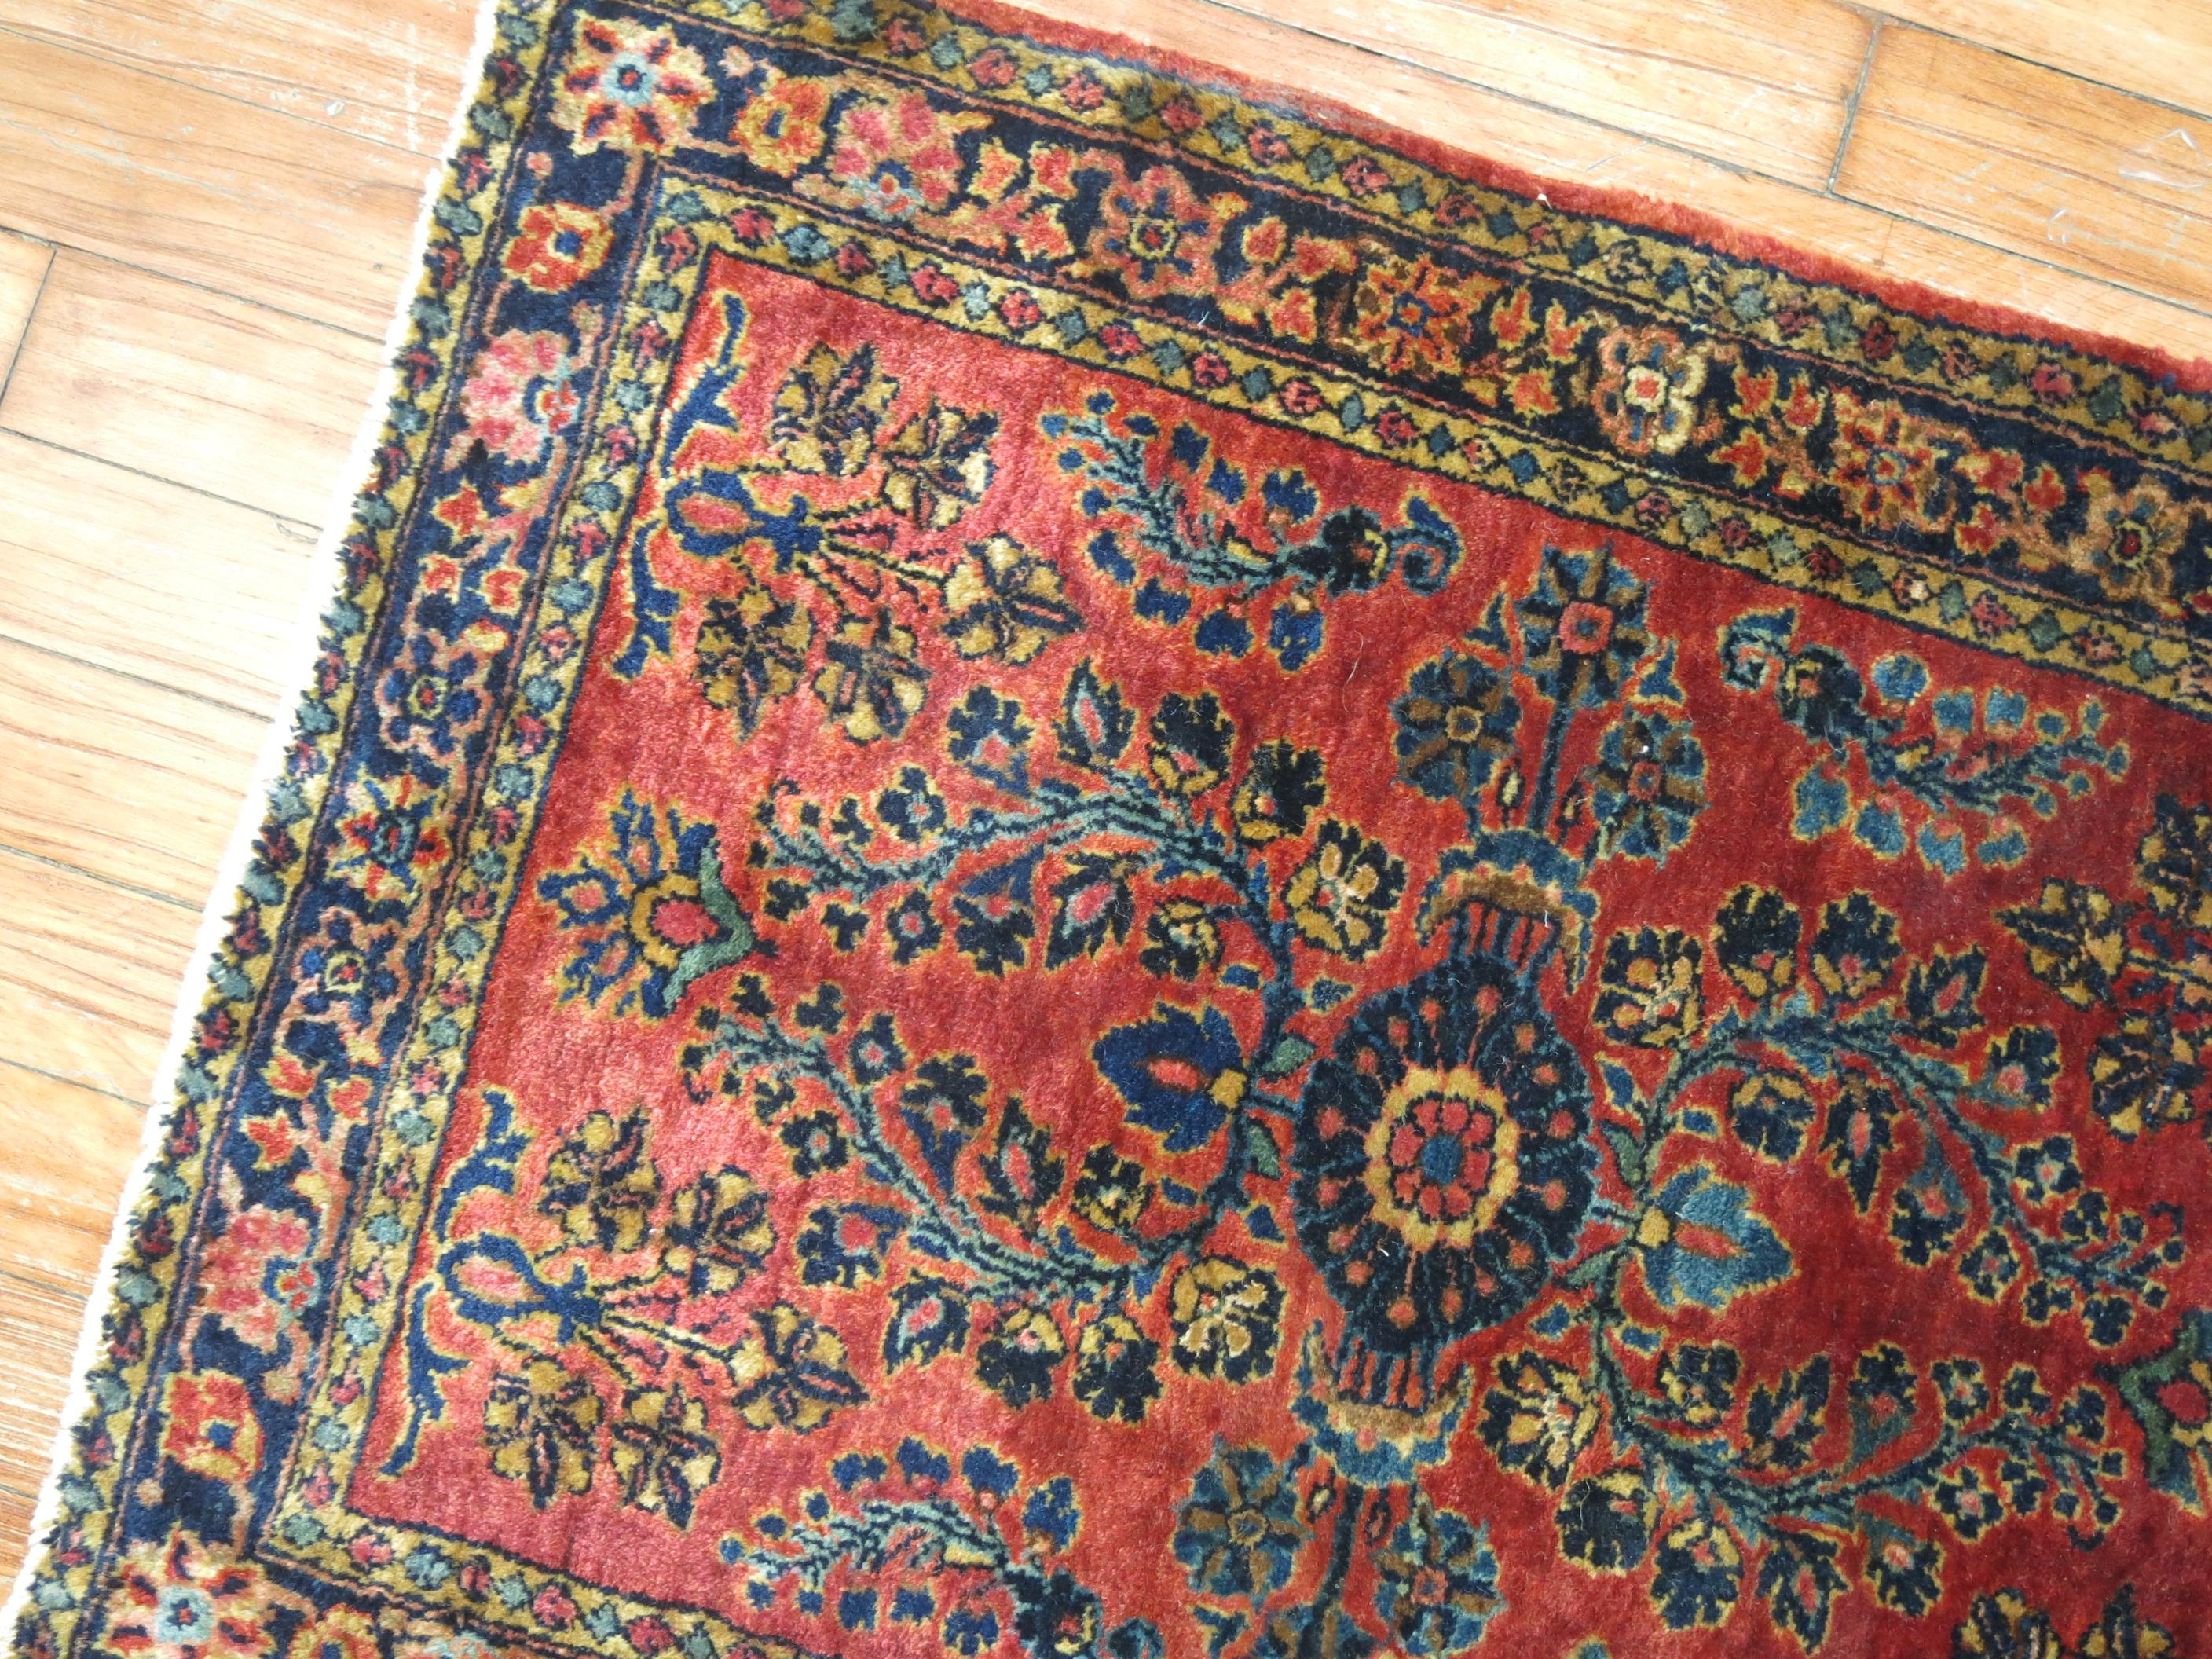 Early 20th century Persian Sarouk mat.

1'10'' x 2'5''

Before the 1920s the Sarouk design was the most popular of Persian rugs worldwide. Most of them consist of deep red fields with navy borders. Rarely are they found in inverse colors like this